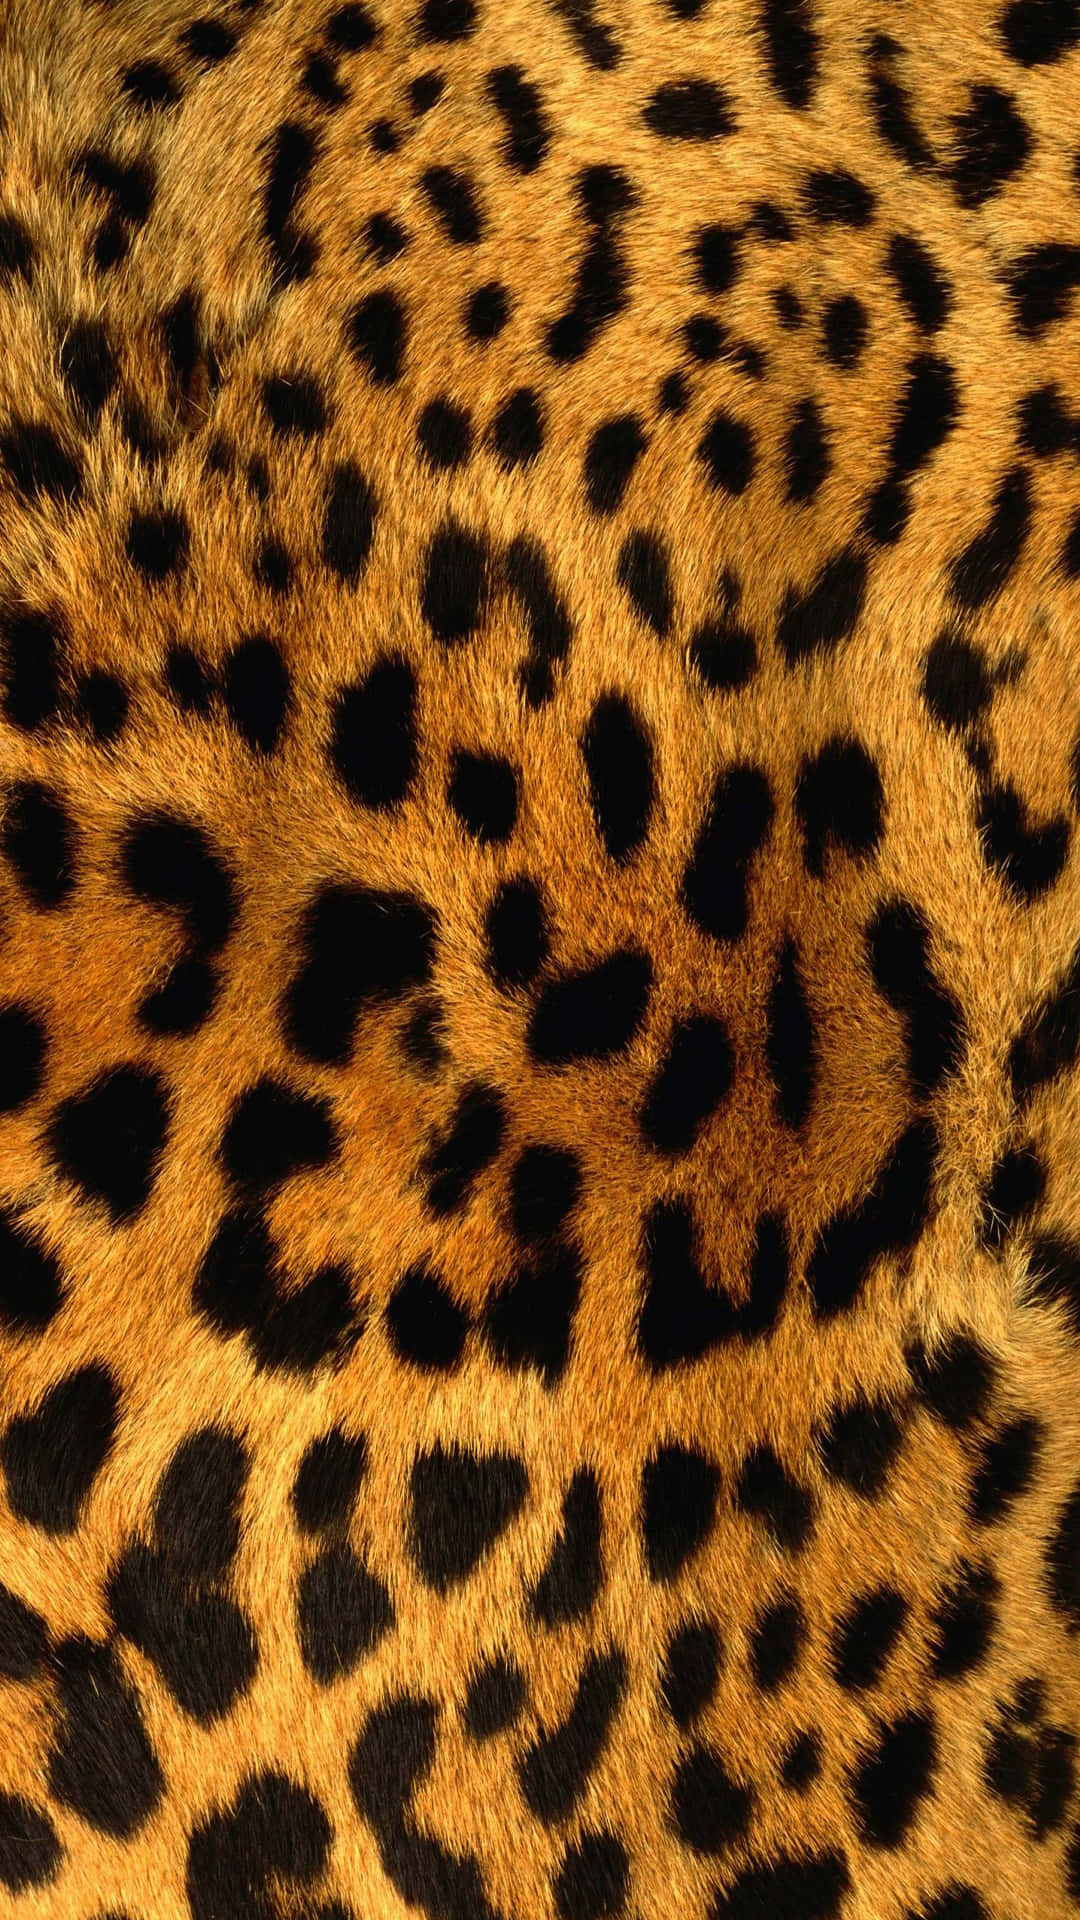 Show your wild side with this colorful animal print iPhone wallpaper Wallpaper